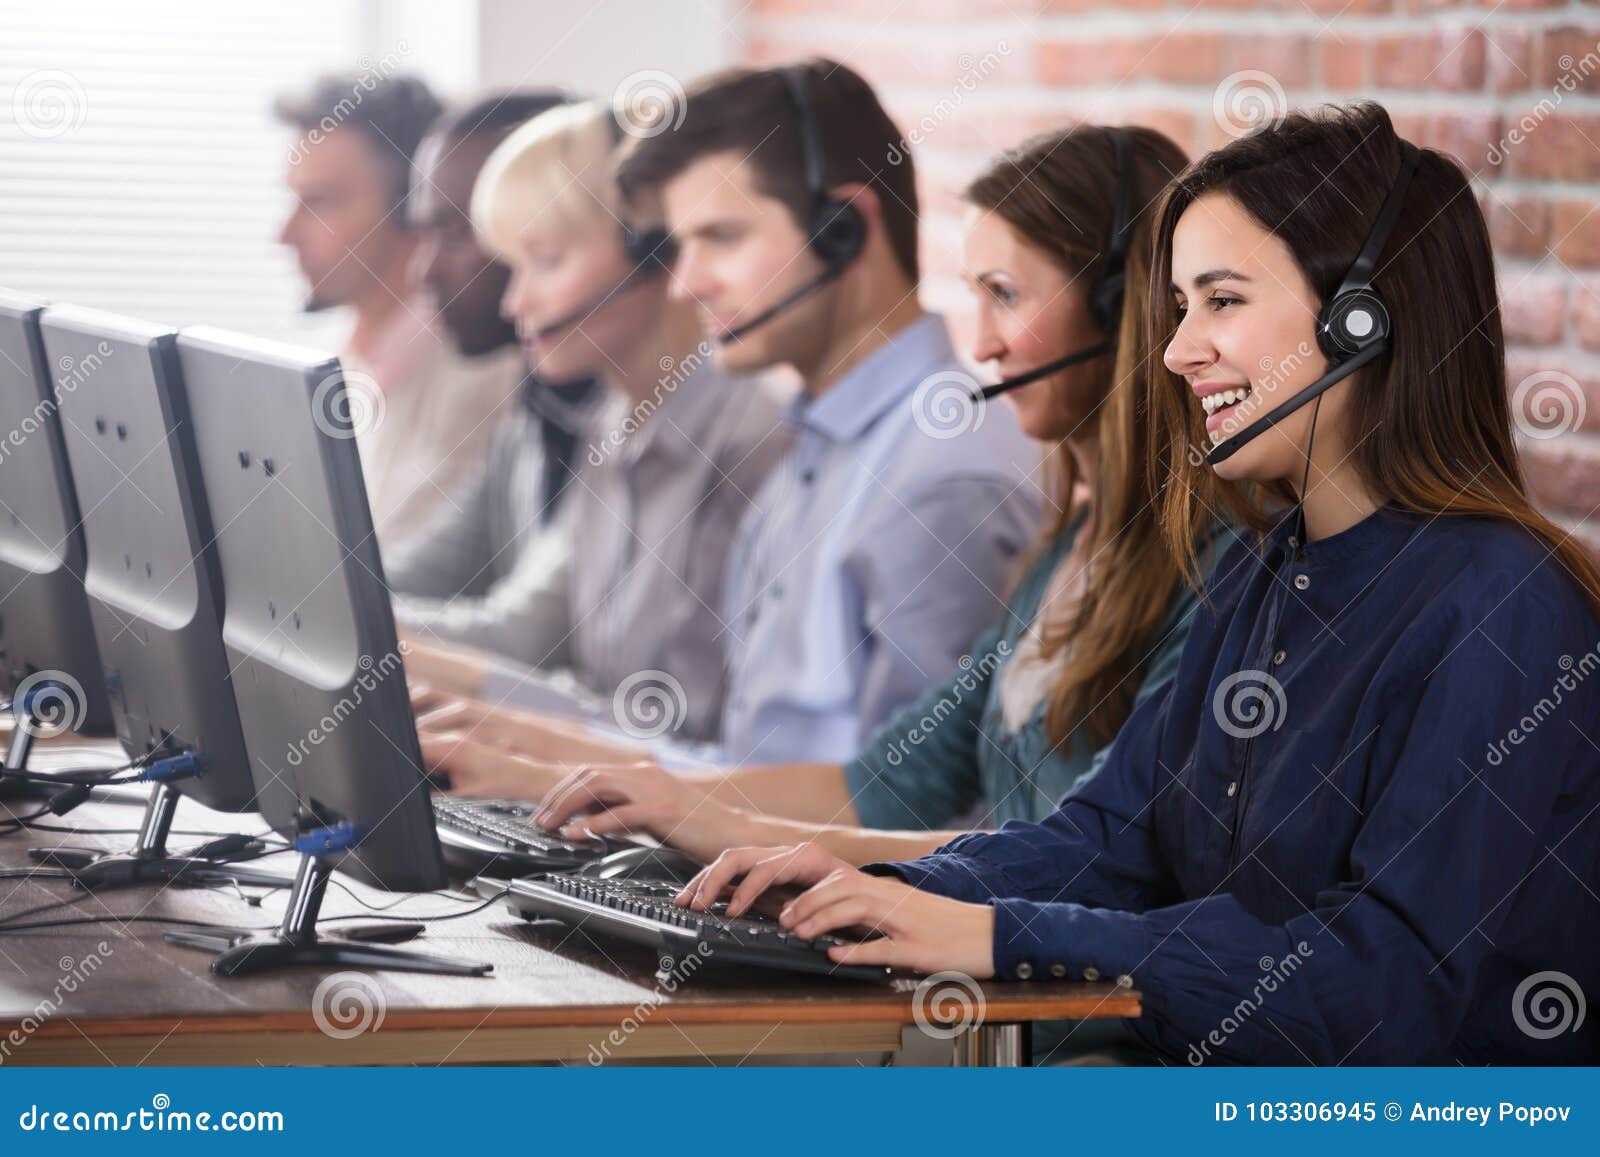 female customer services agent in call center